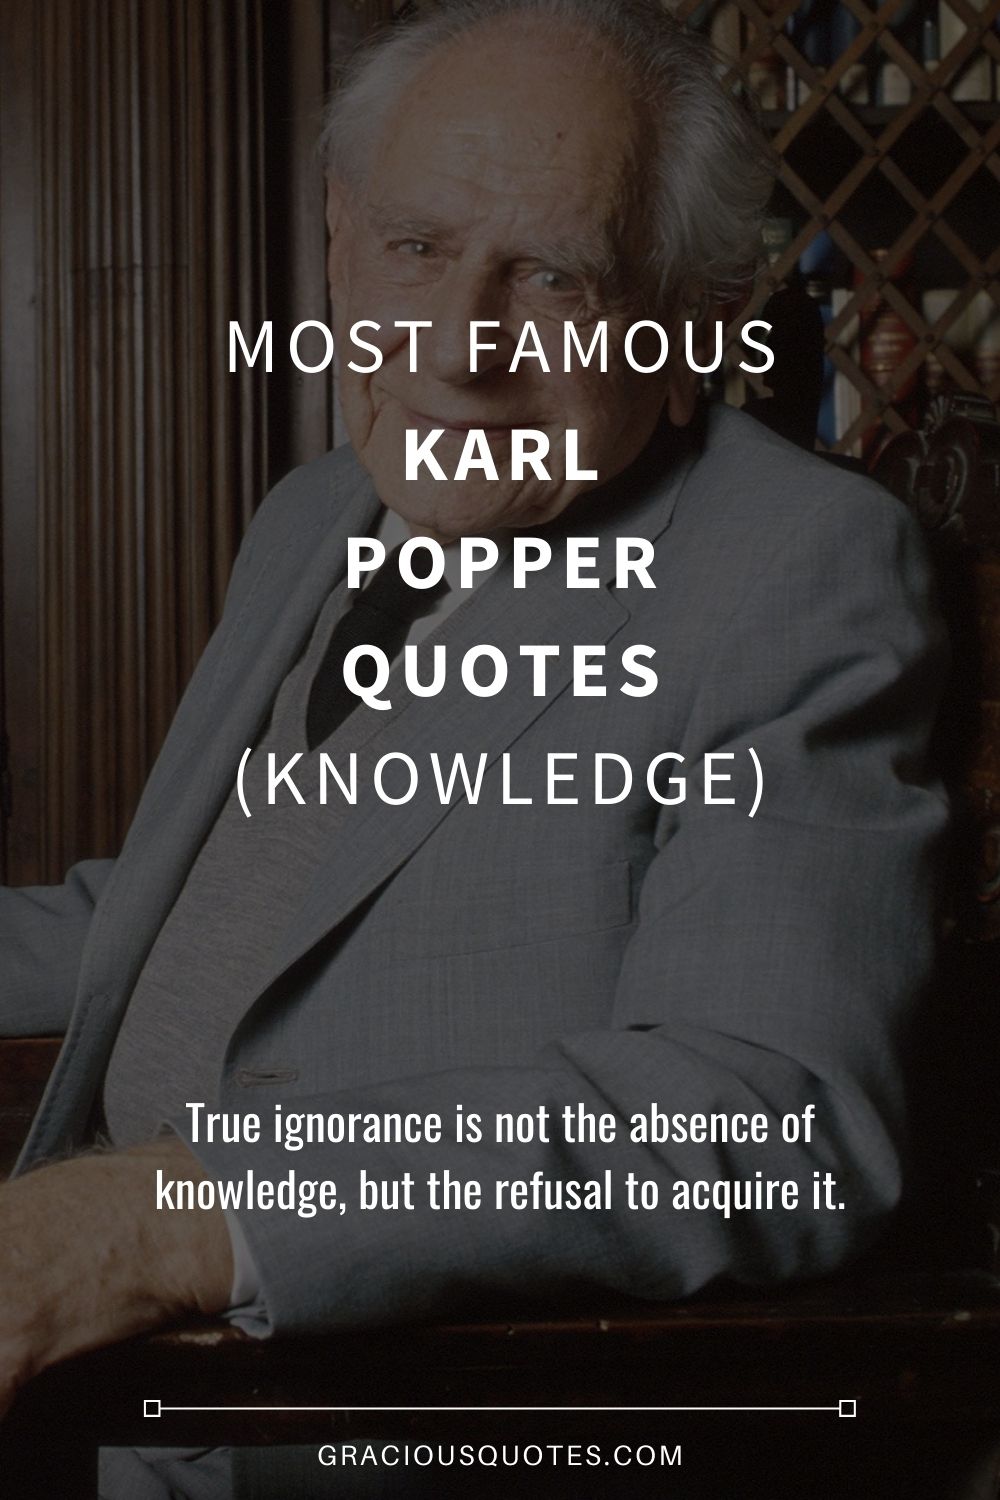 Most Famous Karl Popper Quotes (KNOWLEDGE) - Gracious Quotes